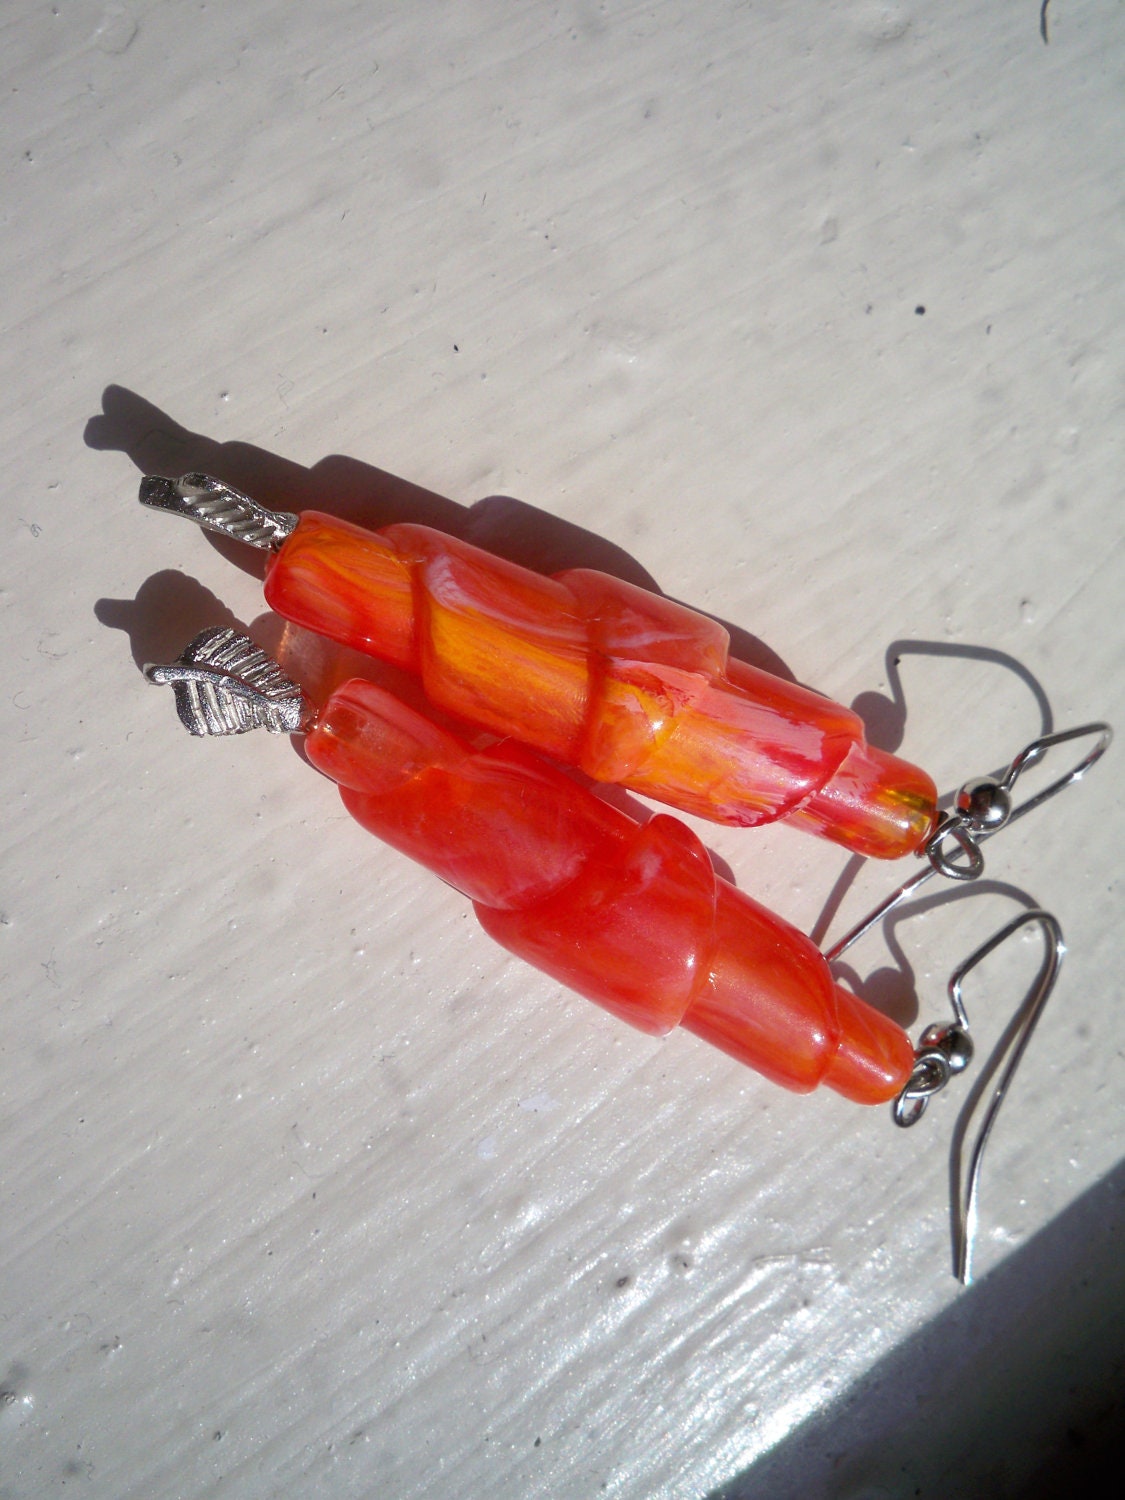 SALE: Vintage Orange Lucite Handrolled Beads - Fall Earring Series - eclecticnesting